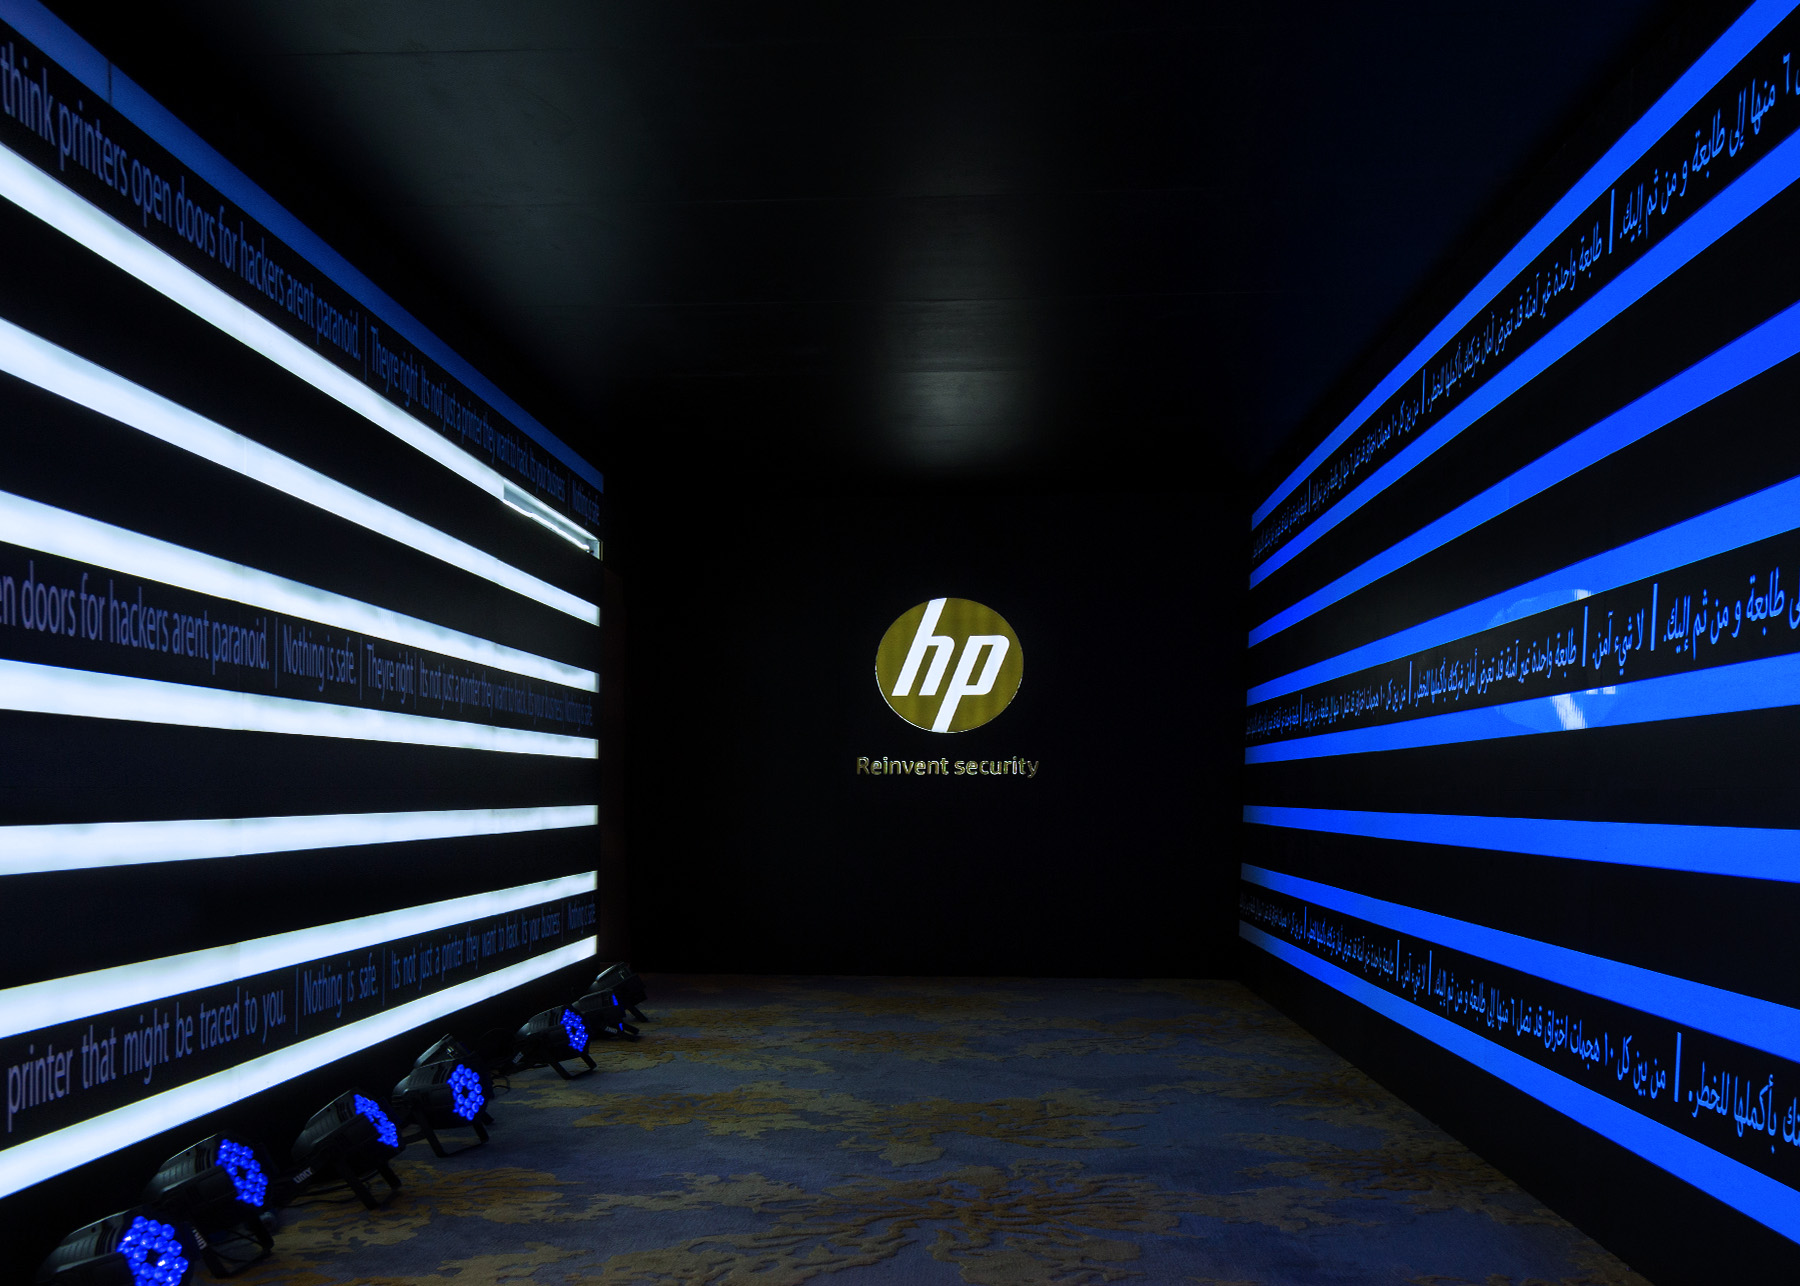 HP branded design at an event venue